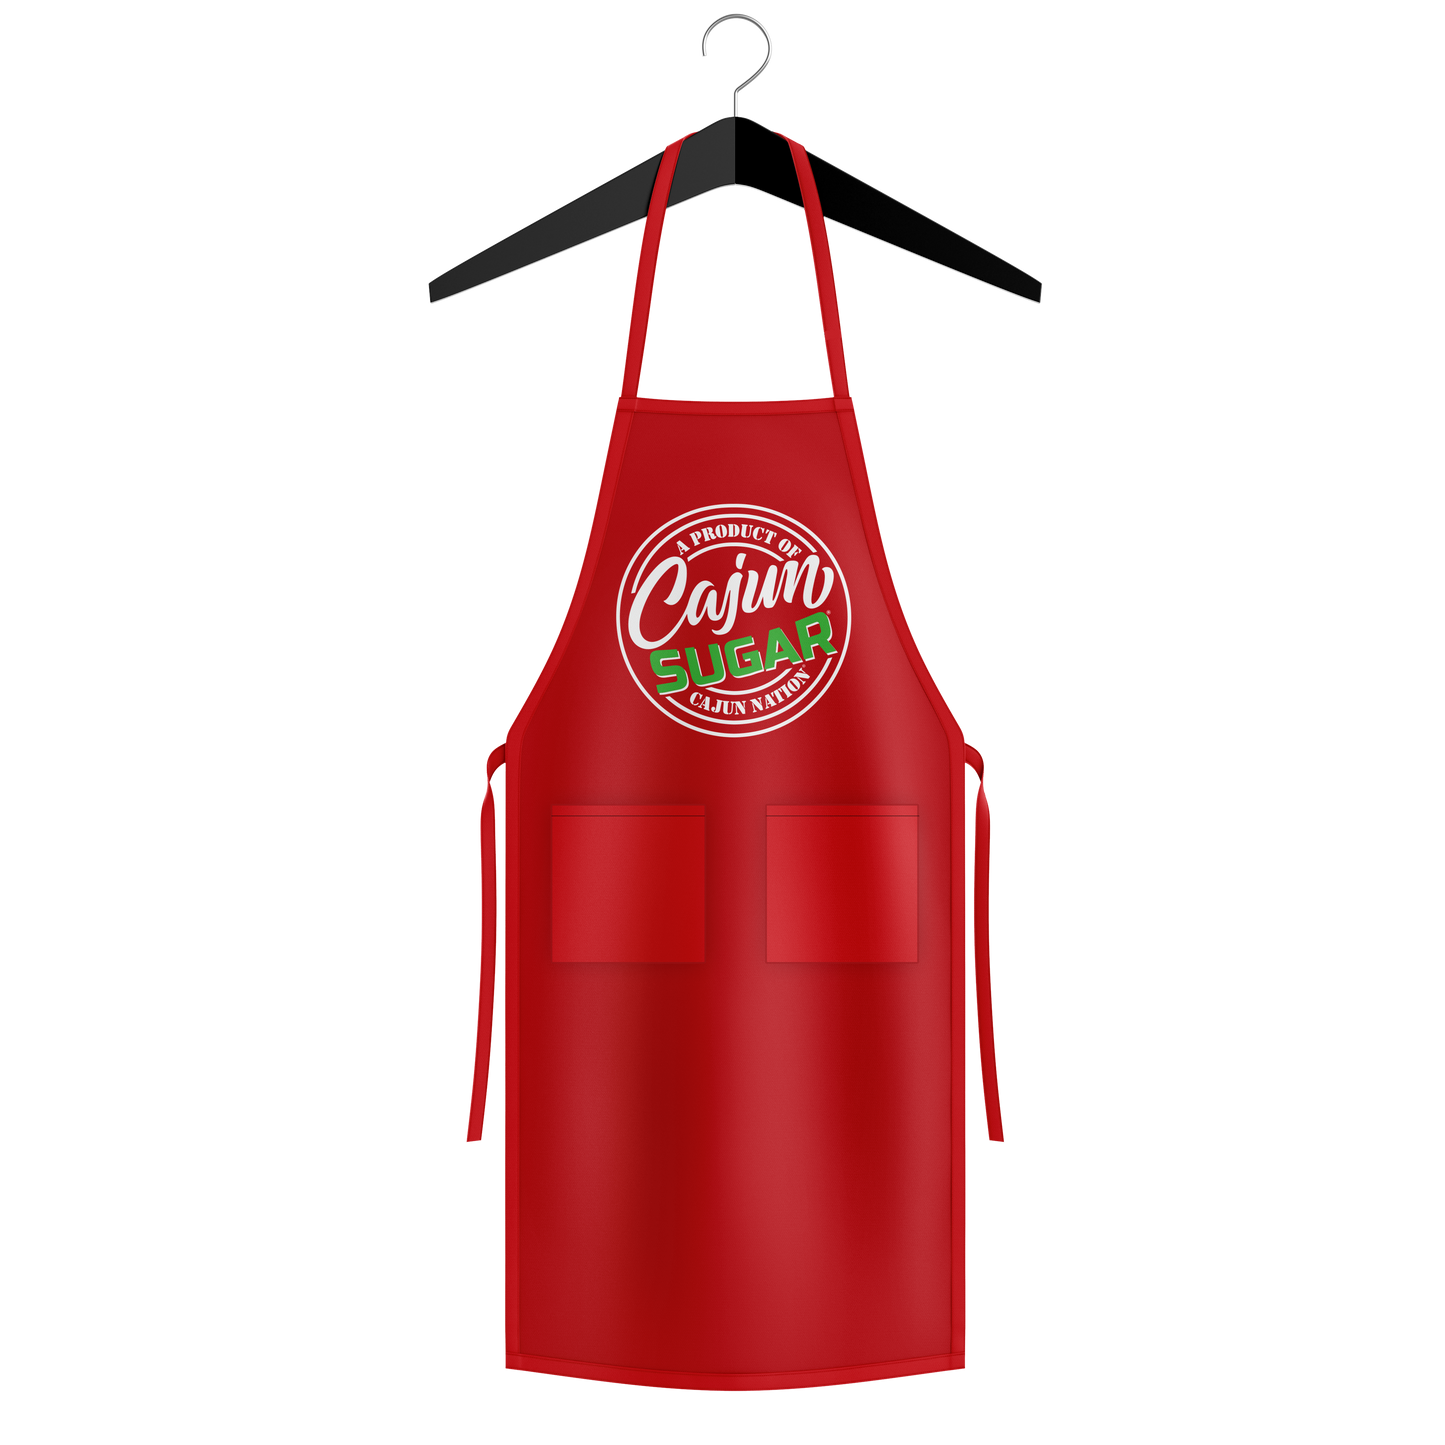 Cajun Sugar Chef Red Apron Length 34 Inches x Width 30 Inches (One Size Fits Most) Apron Length Type Mid-Length Color Red Features With Pockets Material Poly-Cotton Twill Number of Pockets 2 Type Bib Aprons Plastisol print